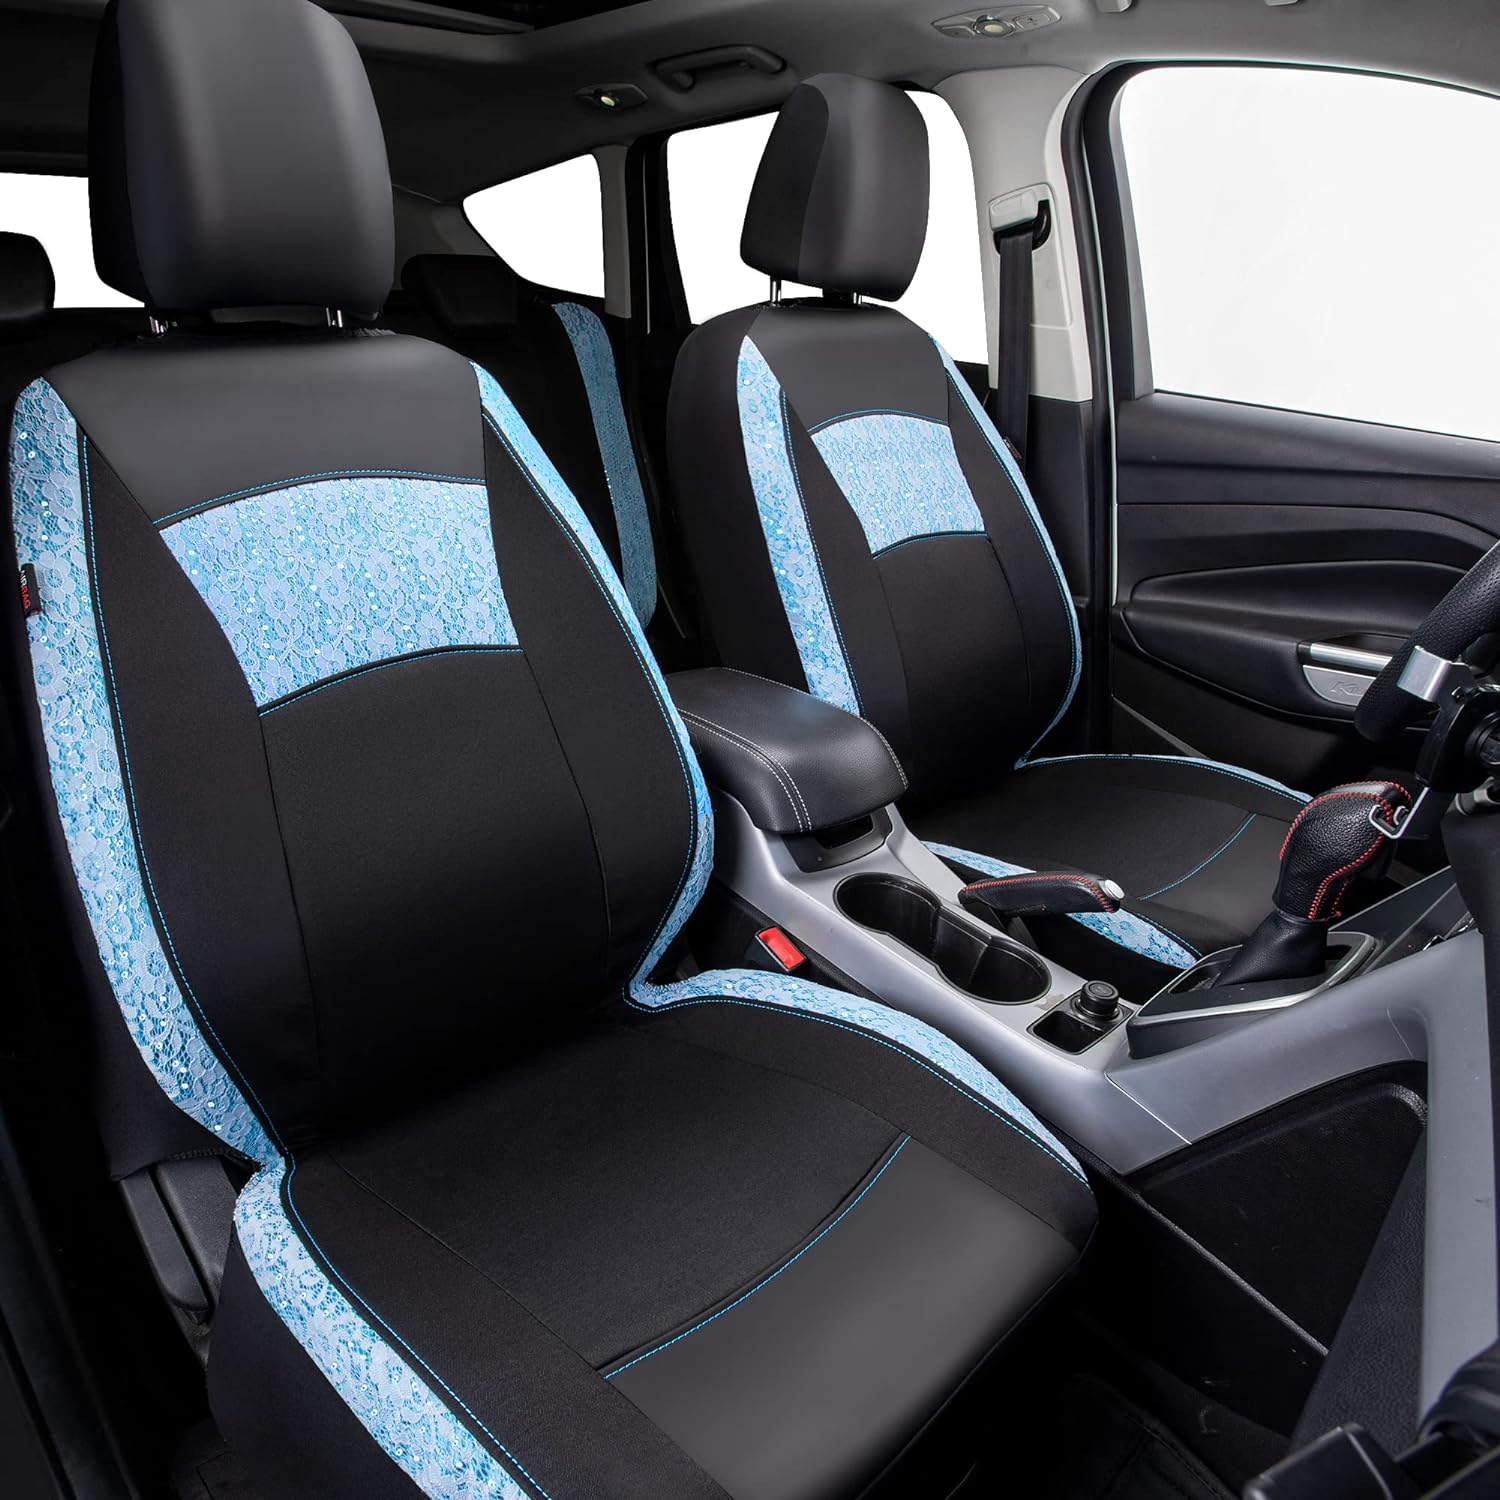 CAR PASS Gabardine Leather Lace Car Seat Covers Full Set, Mint Blue Cute Seat Cover for Women Girl,Universal Fits 95% Cars,Trucks,SUV, Vans, Automotive Compatible with AIRBAG (Black Mint Blue)